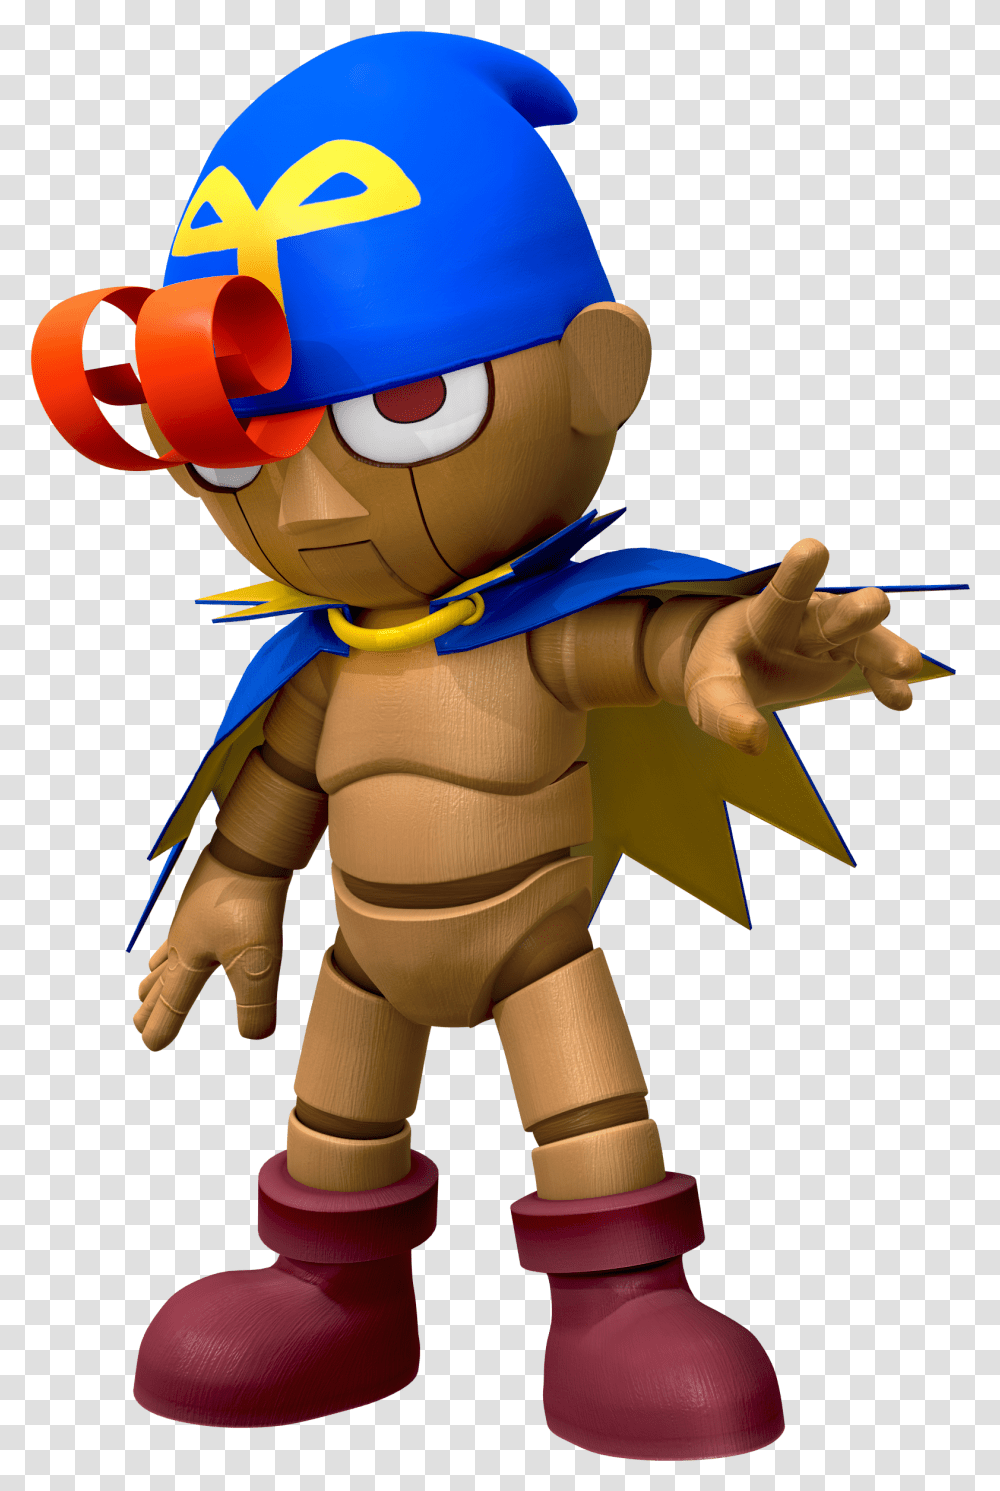 Geno Super Mario Rpg, Toy, Astronaut, Doll Transparent Png